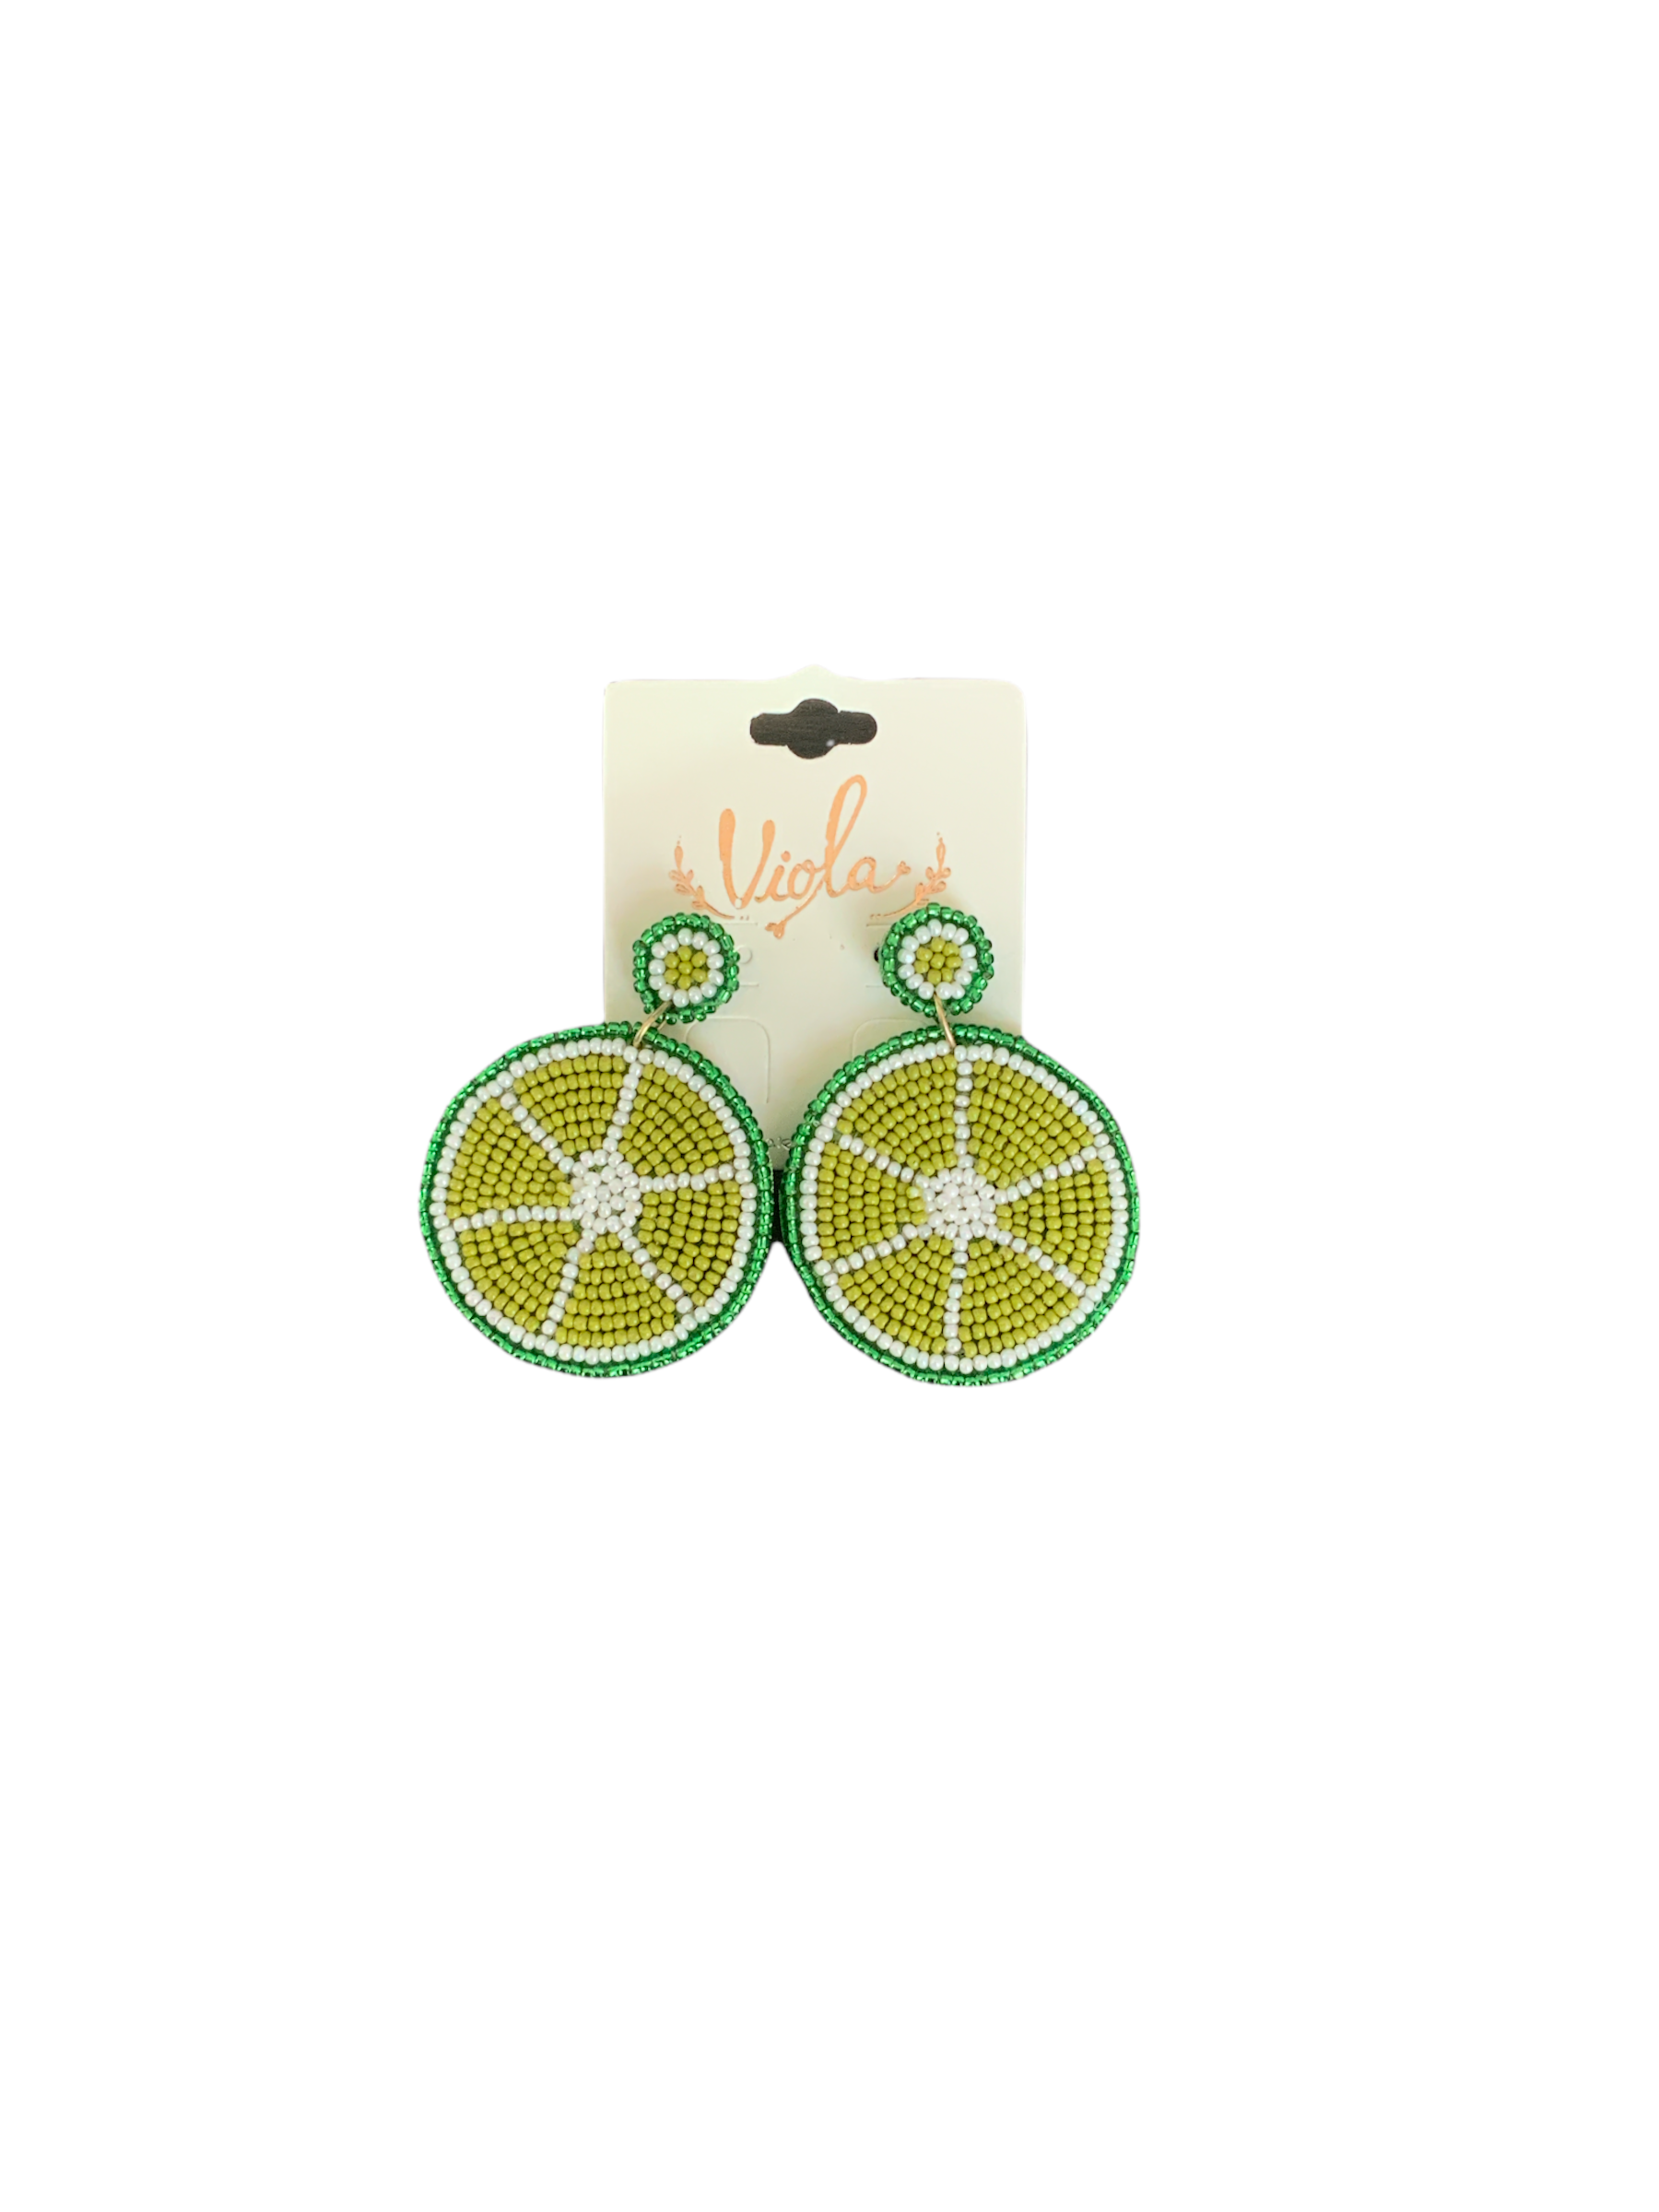 LIME EARRINGS - Baby Bums Clothing 